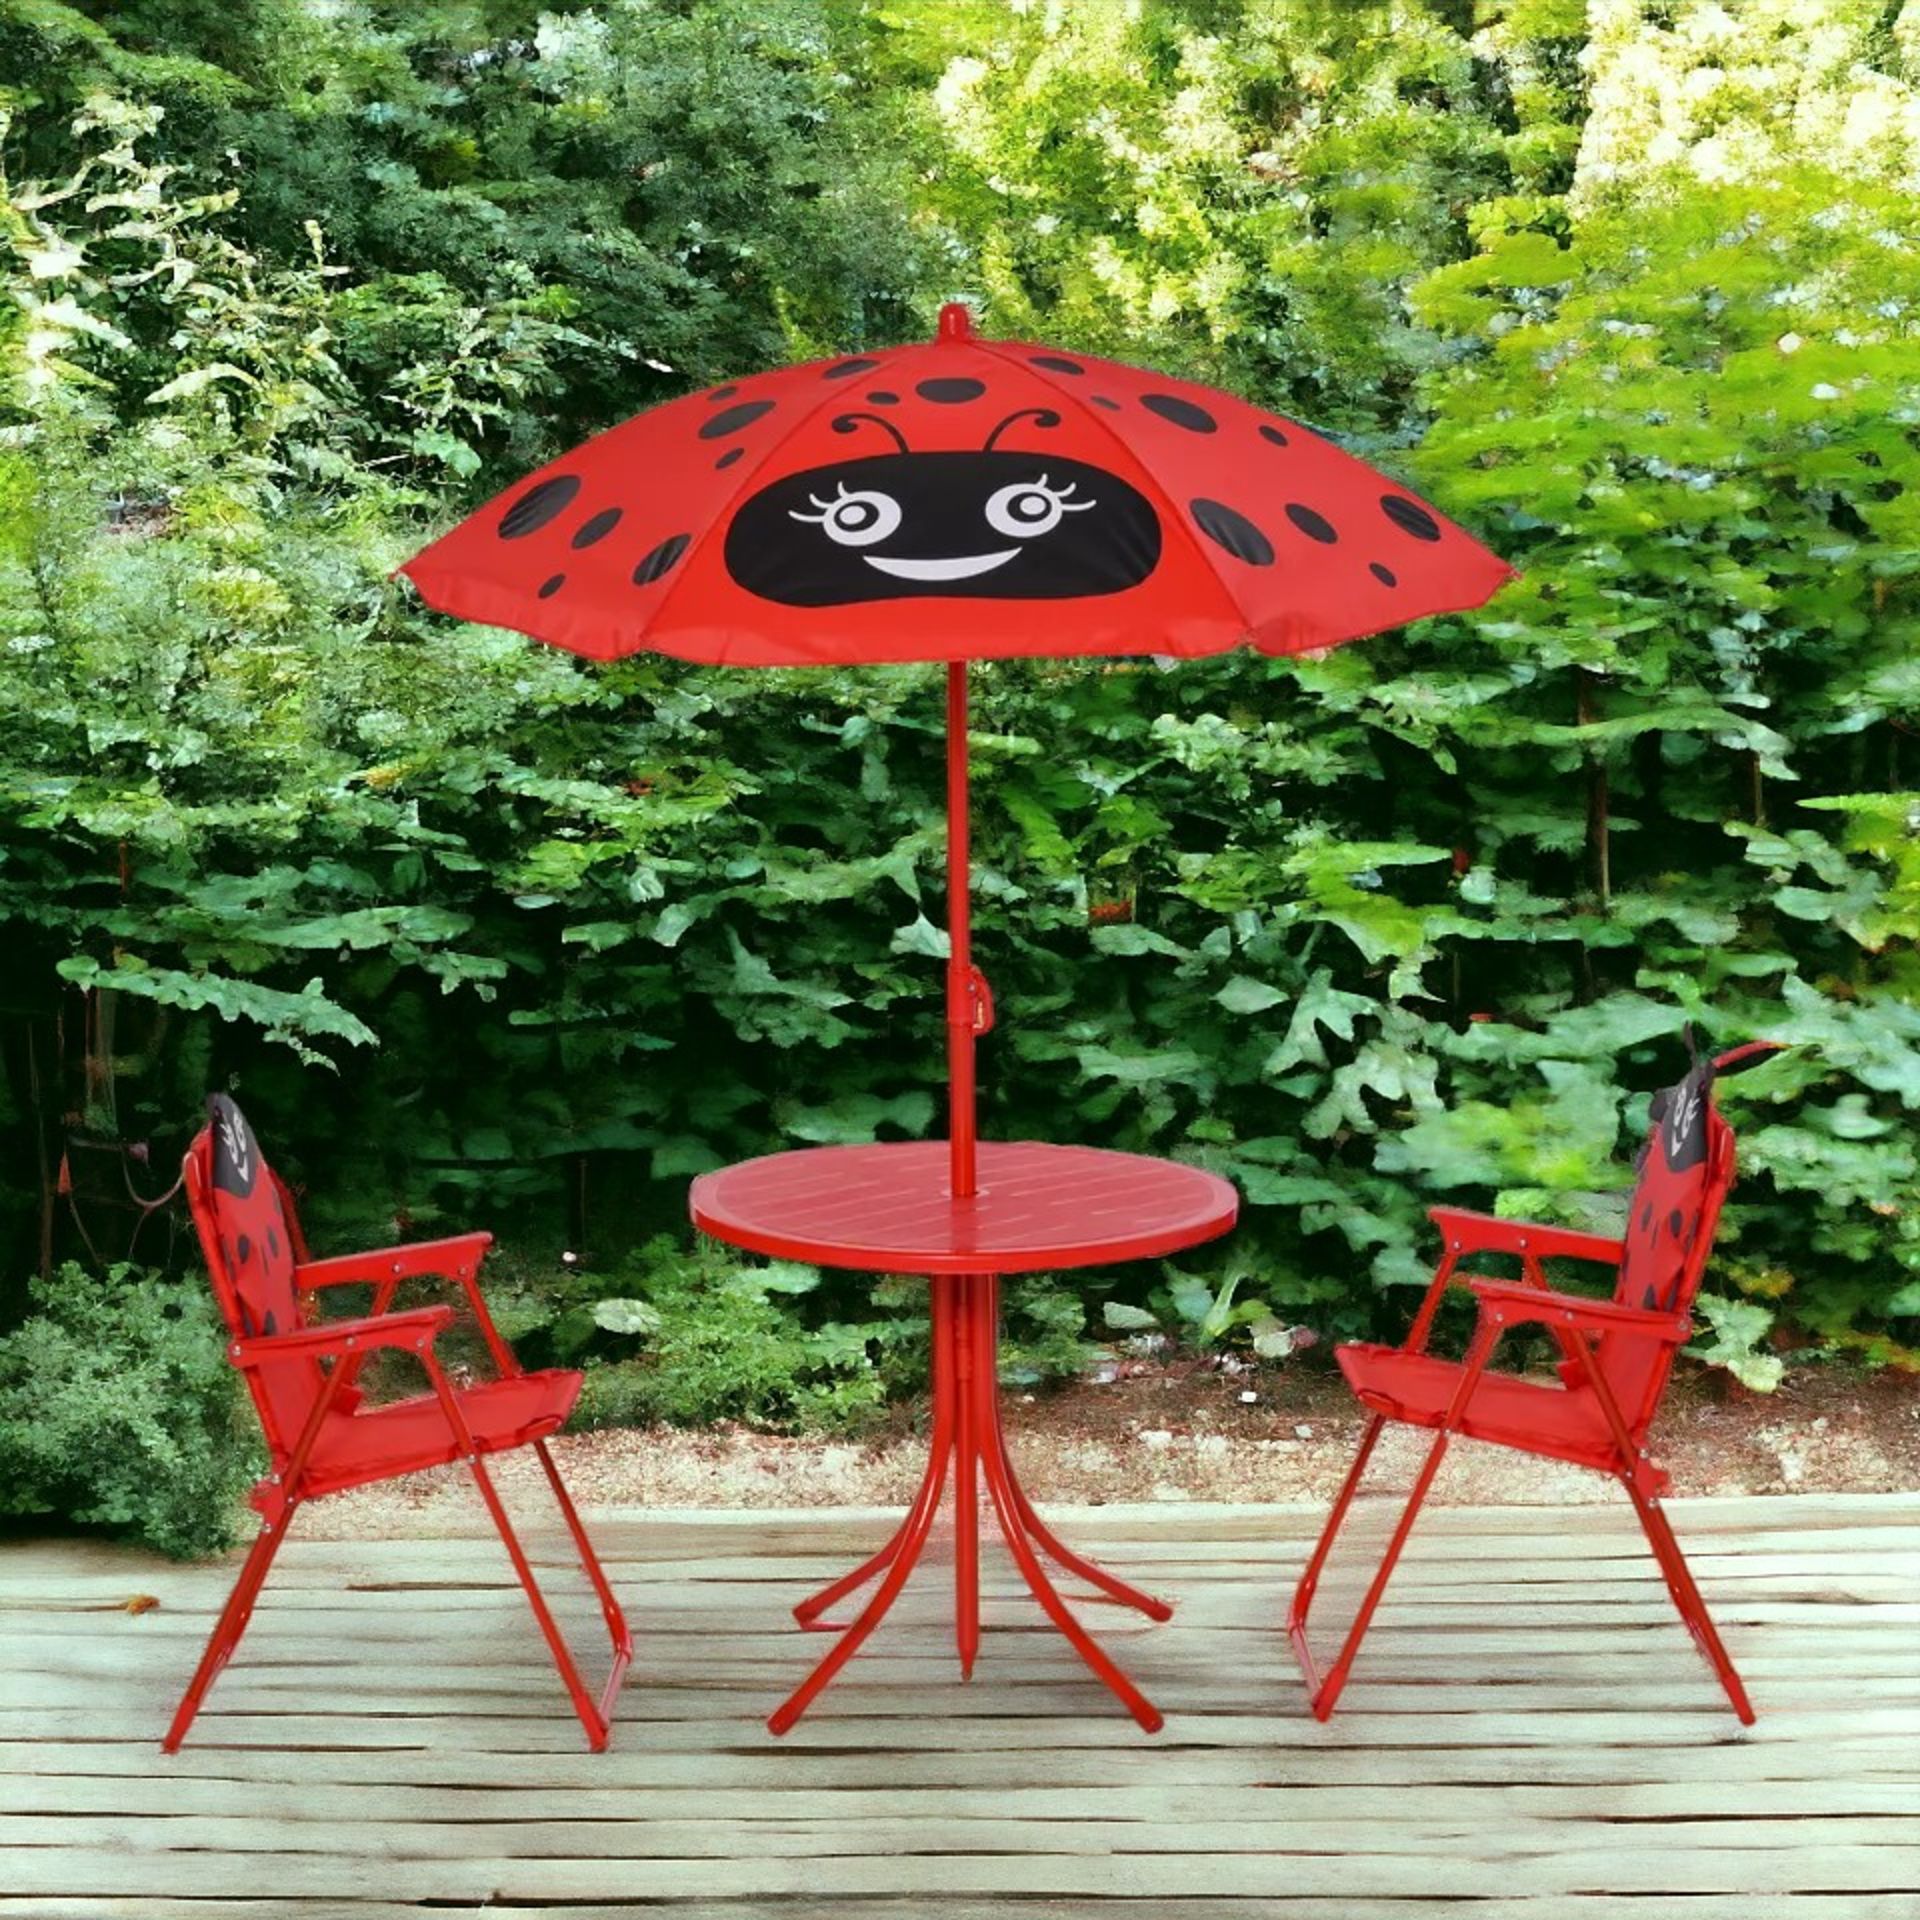 FREE DELIVERY- BRAND NEW KIDS FOLDING PICNIC TABLE CHAIR SET LADYBUG PATTERN OUTDOOR W/ PARASOL